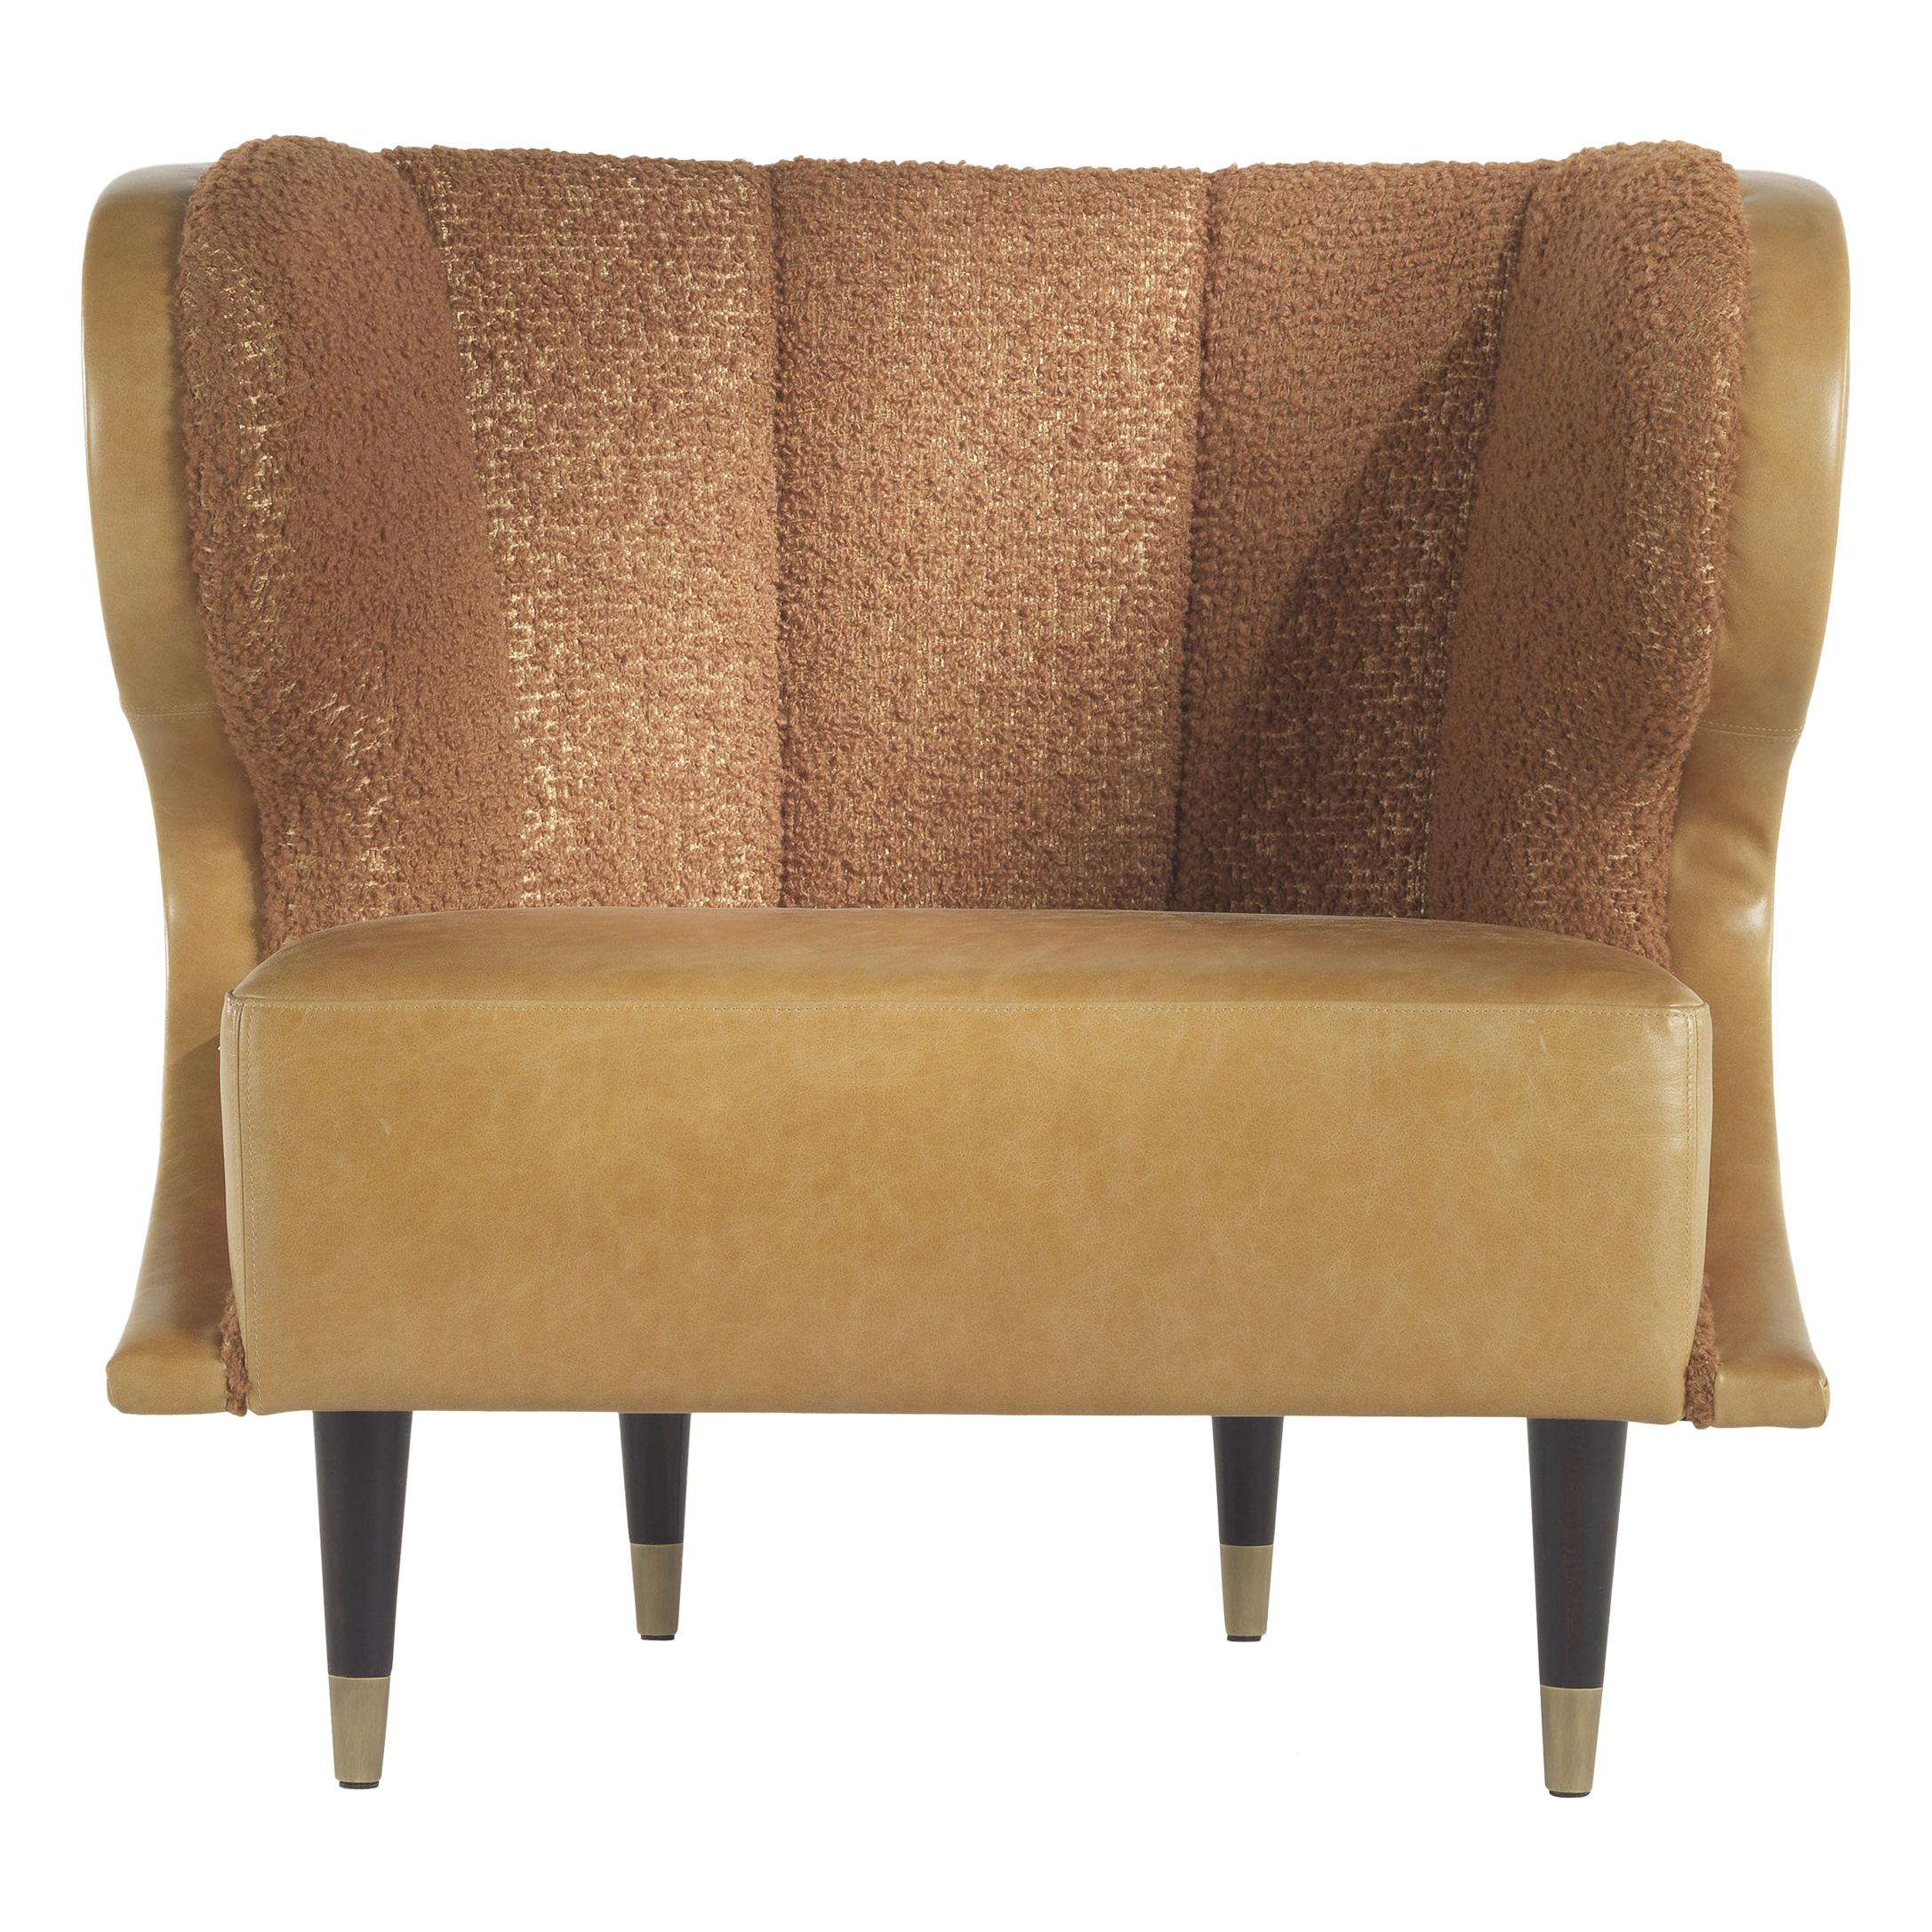 Gianfranco Ferré Home Dunlop Armchair in Bronze Boucle Wool fabric For Sale